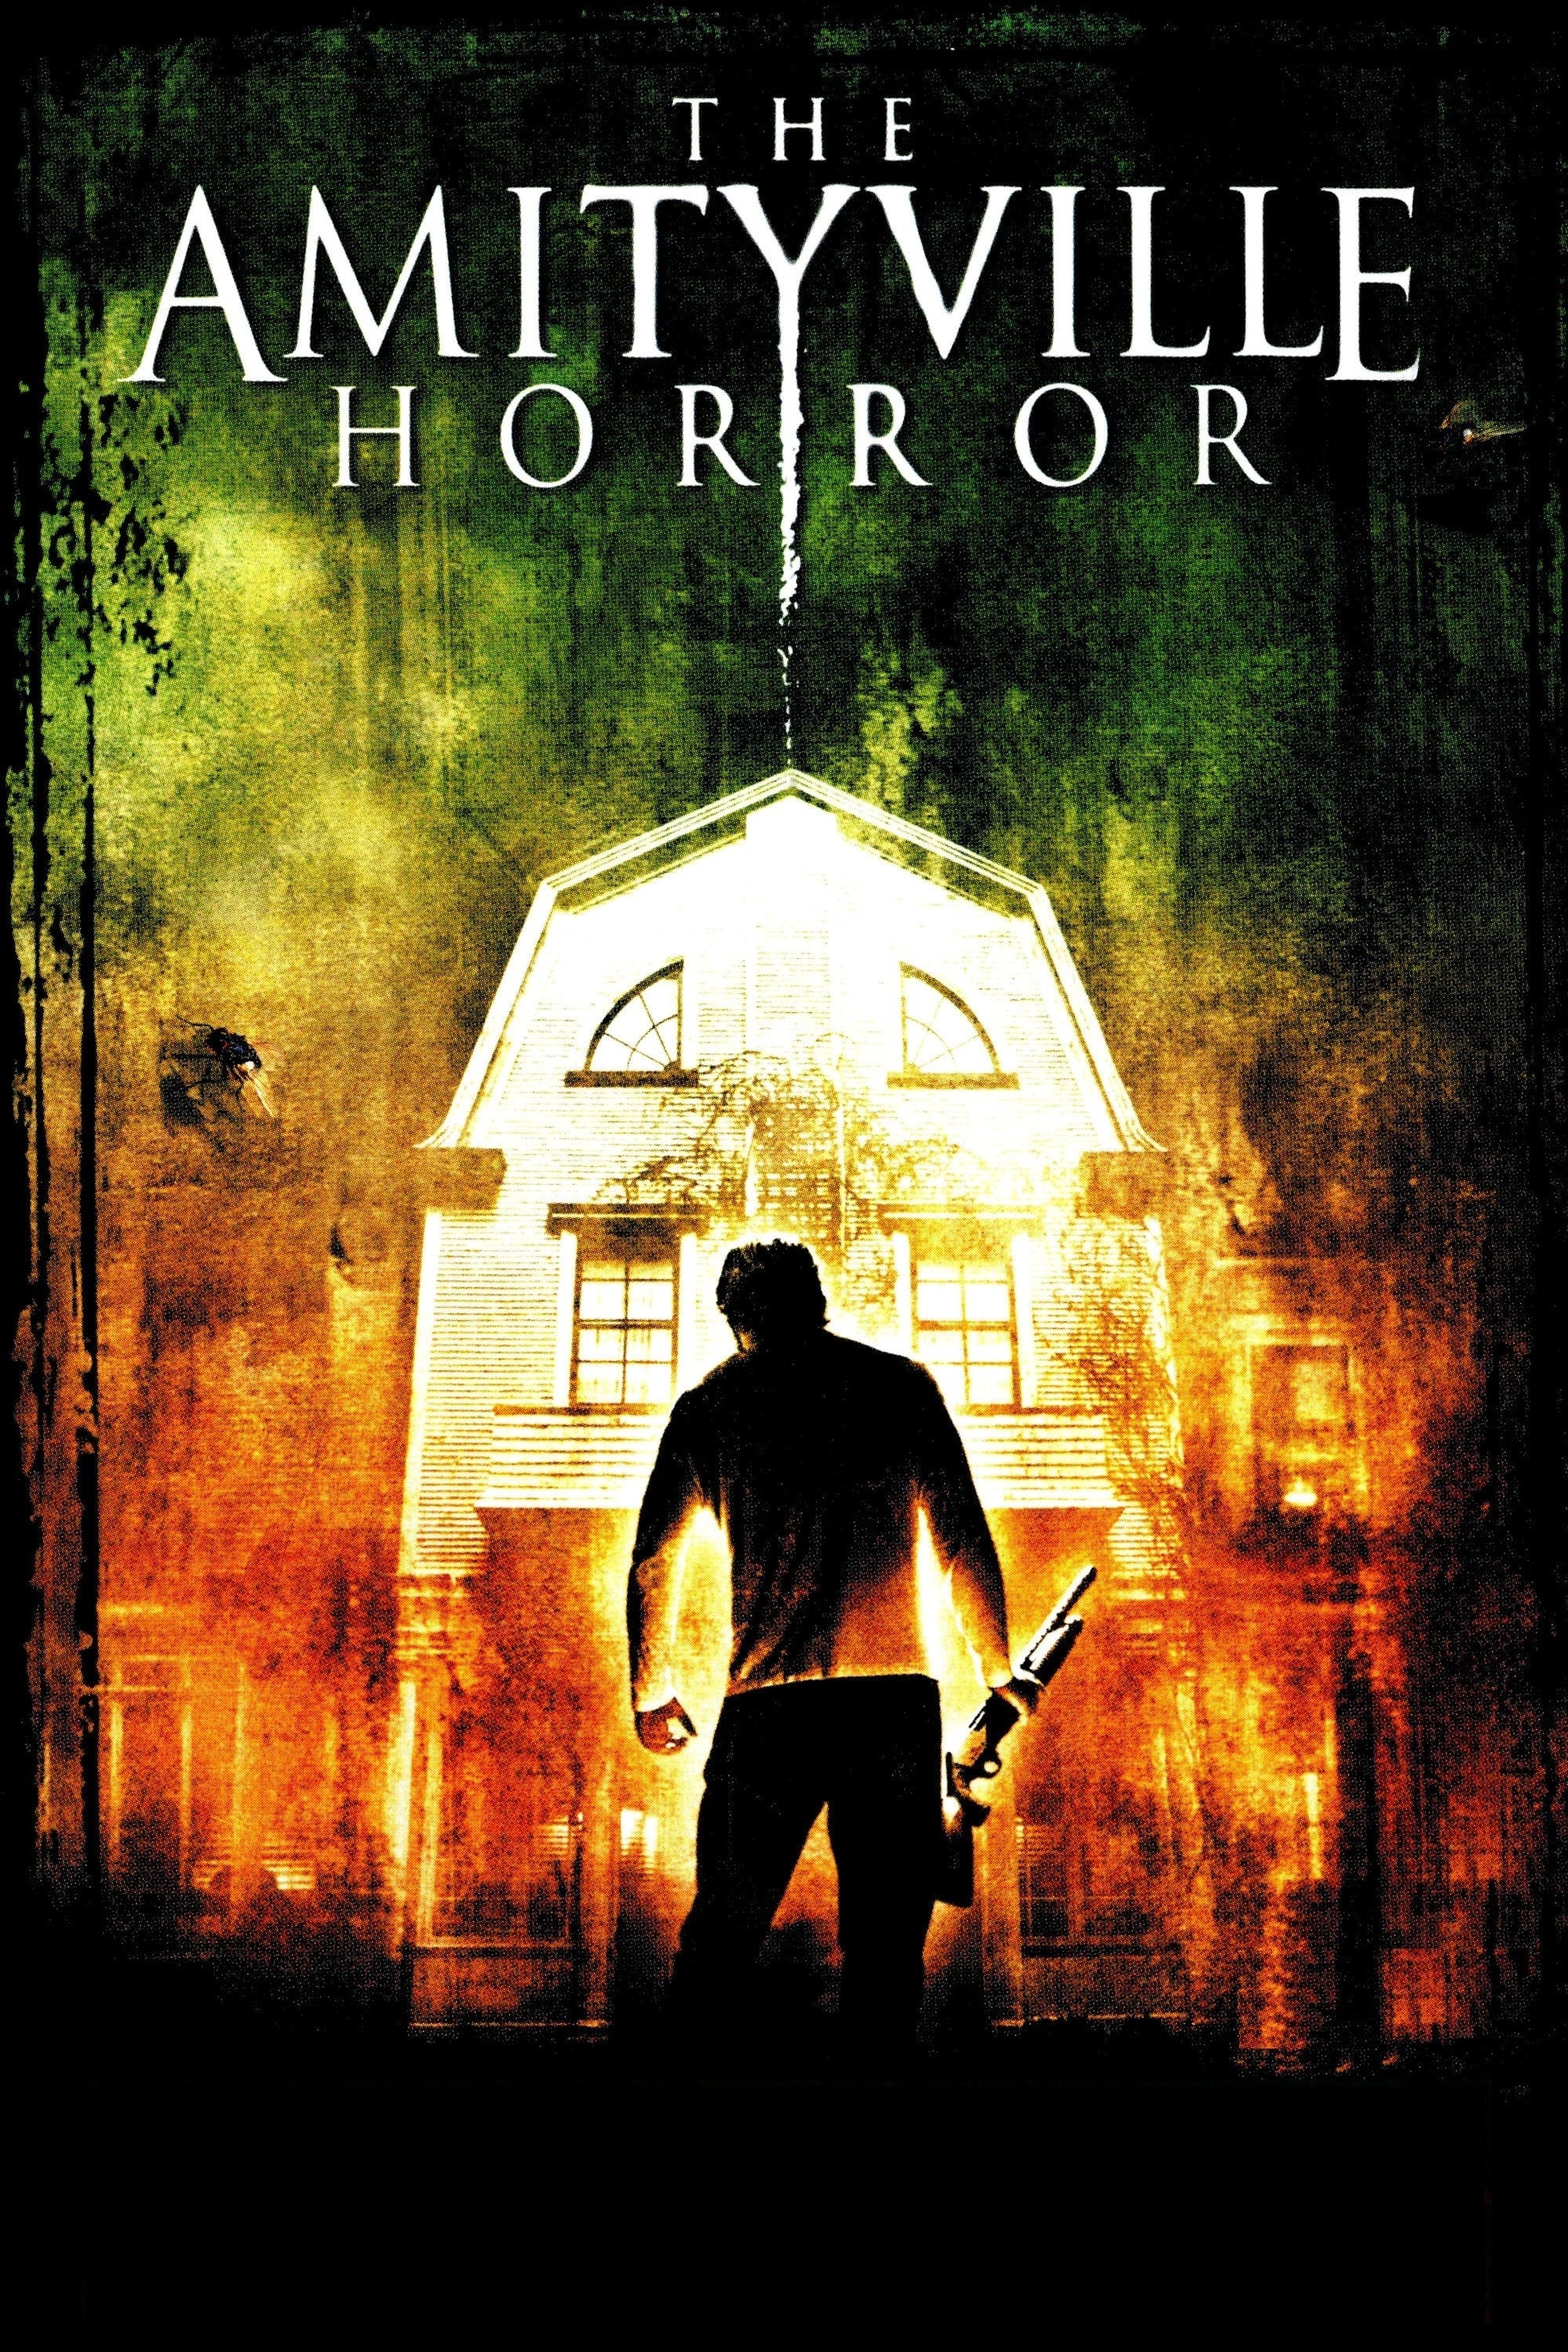 The Amityville Horror Movie poster